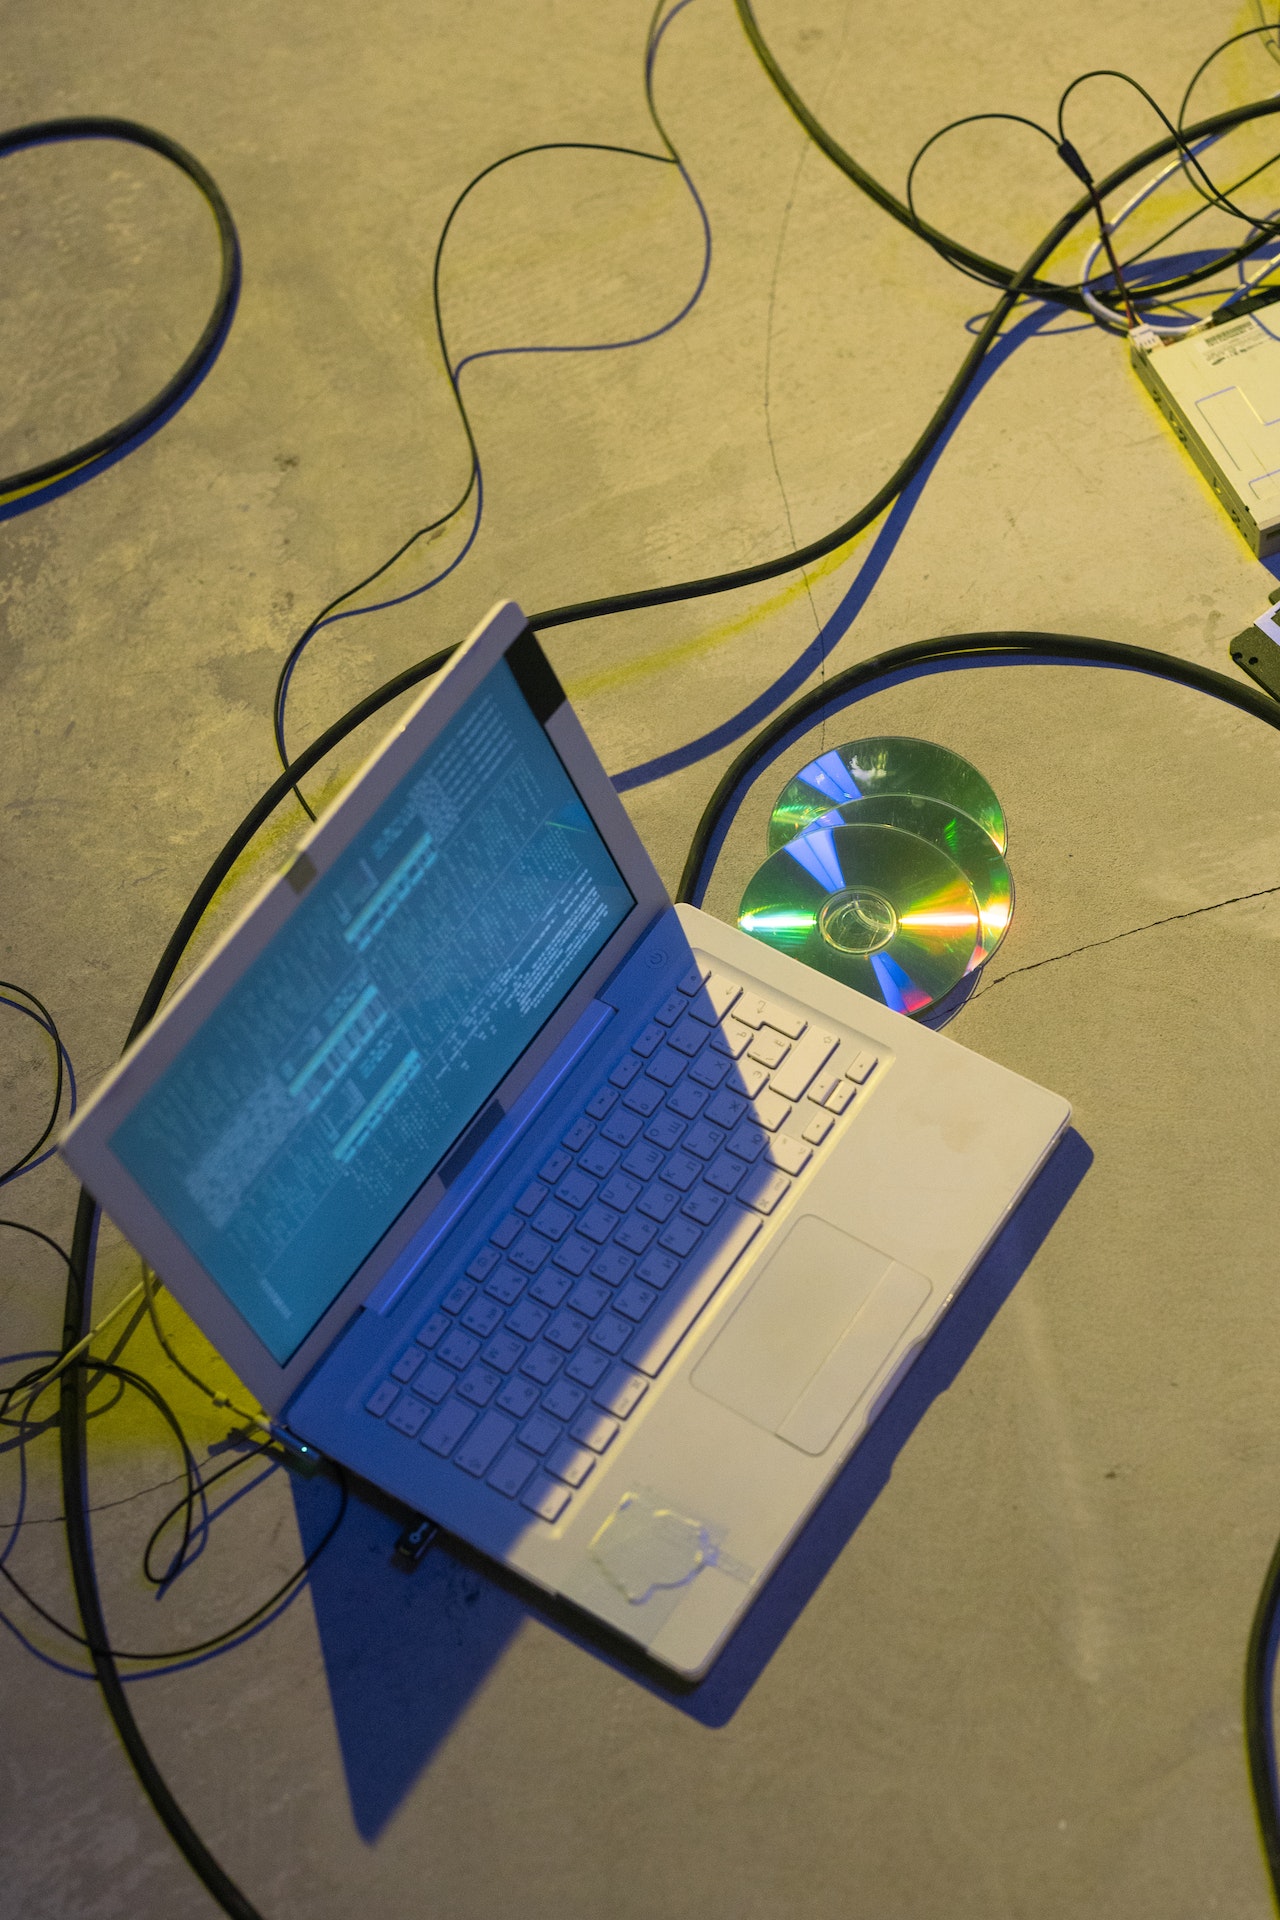 laptop near compact disc on the concrete ground